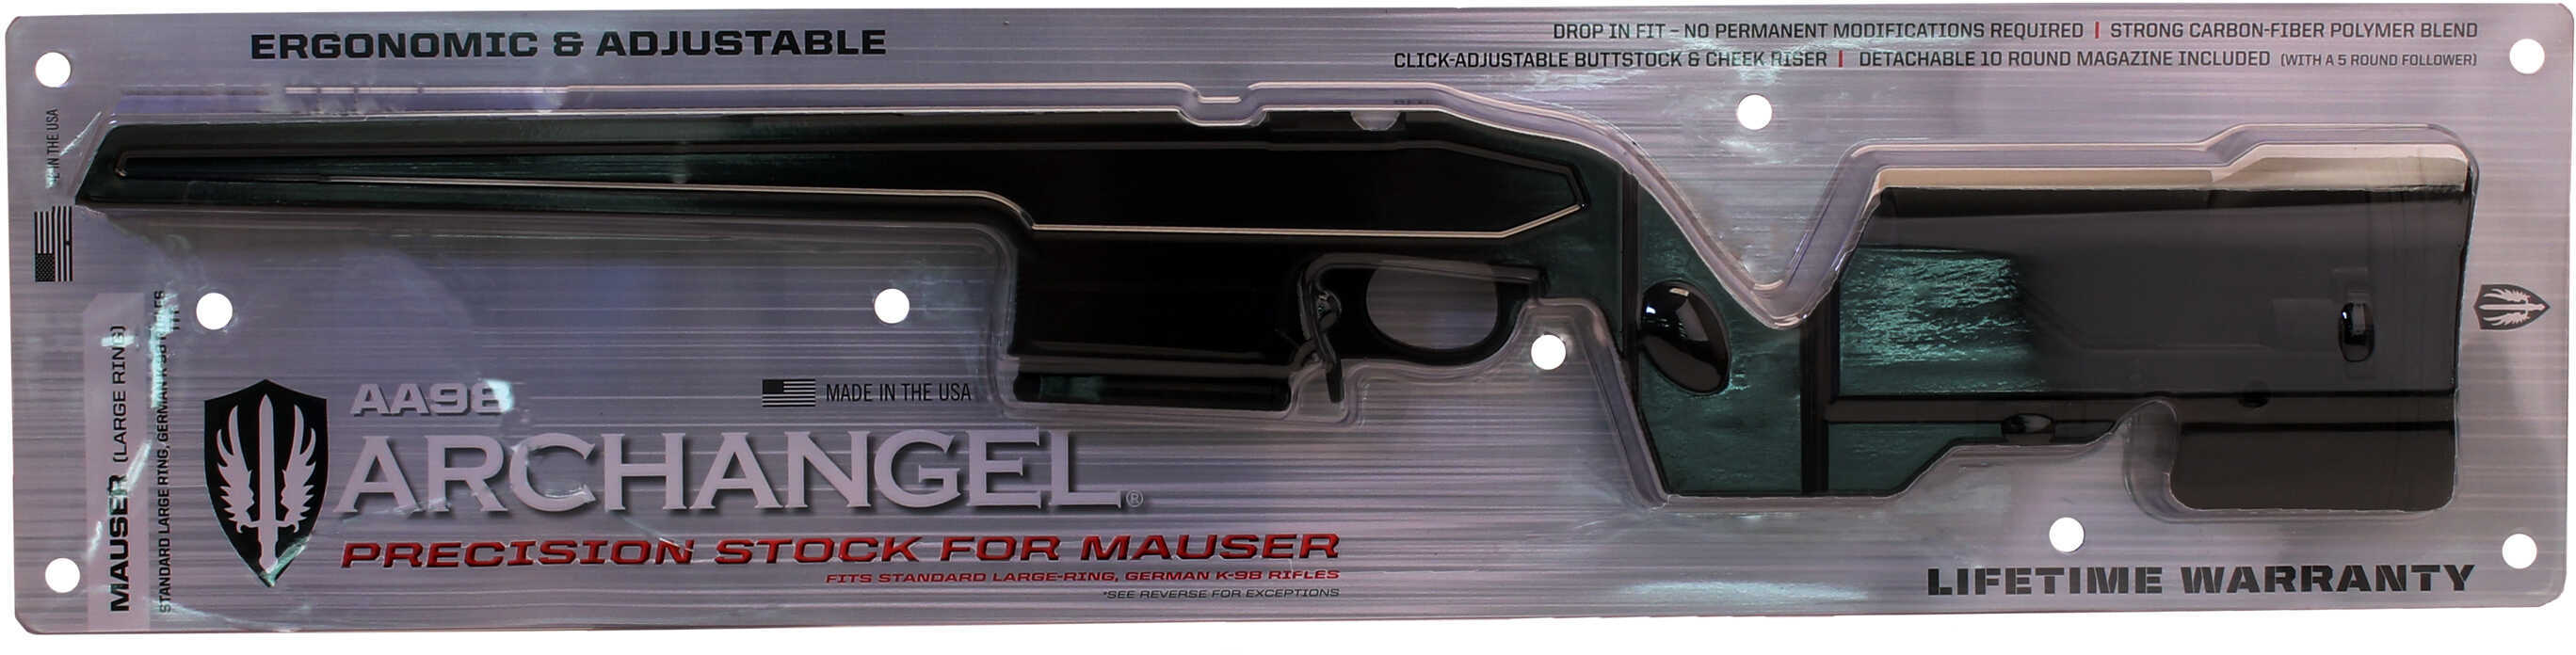 ProMag Archangel Mauser Precision Stock- Black Md: AA98-img-1